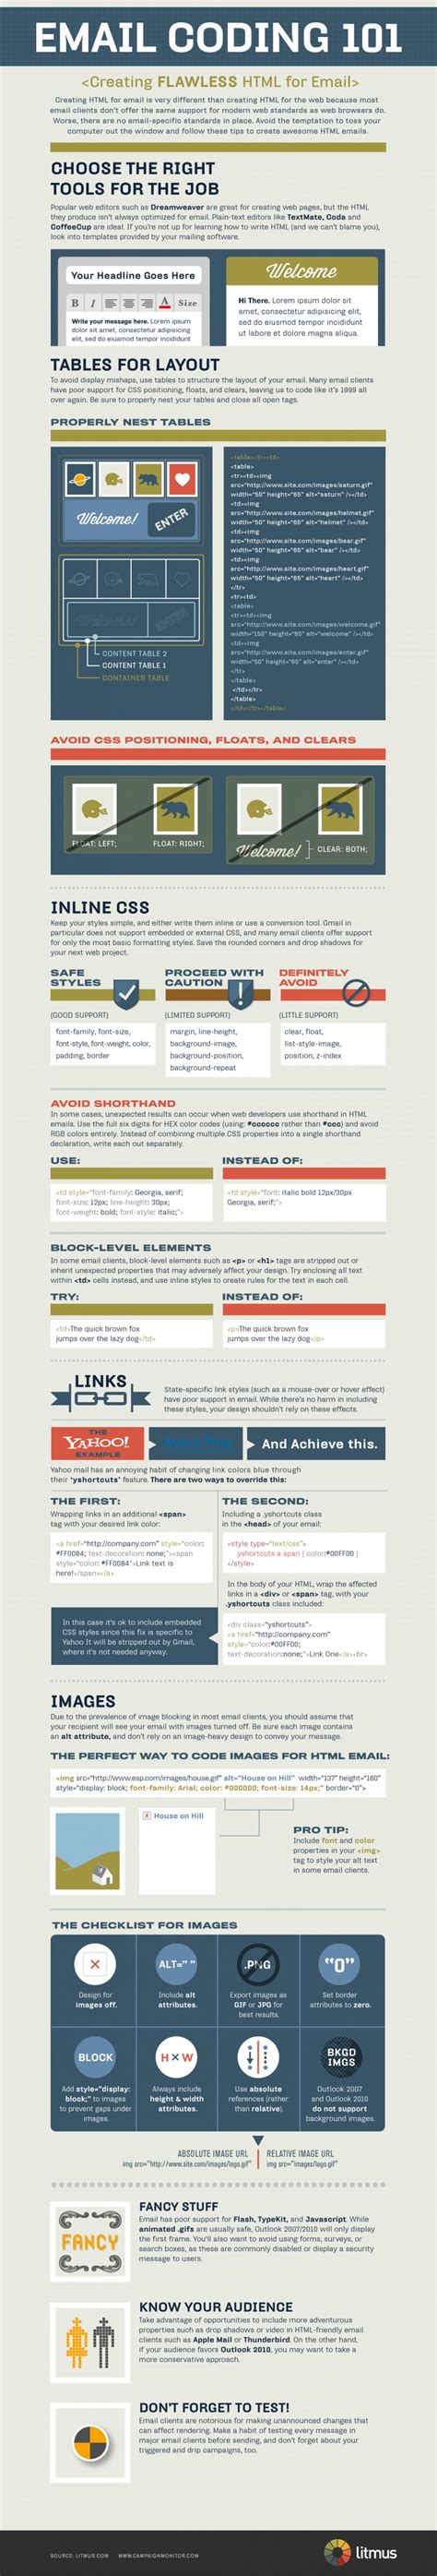 html email code   guide  email marketing infographic